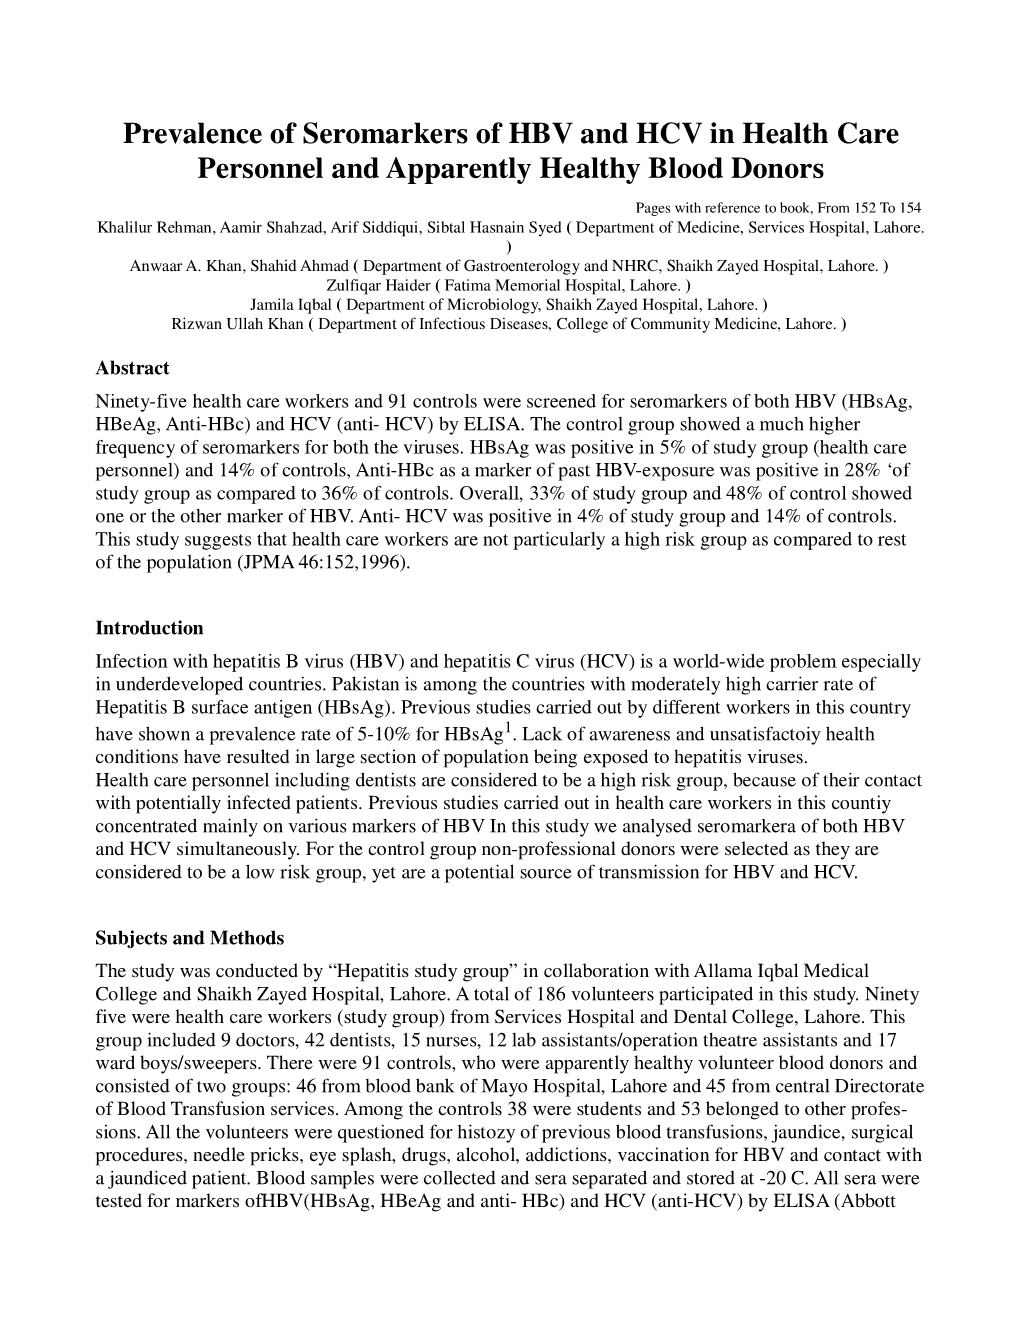 Prevalence of Seromarkers of HBV and HCV in Health Care Personnel and Apparently Healthy Blood Donors